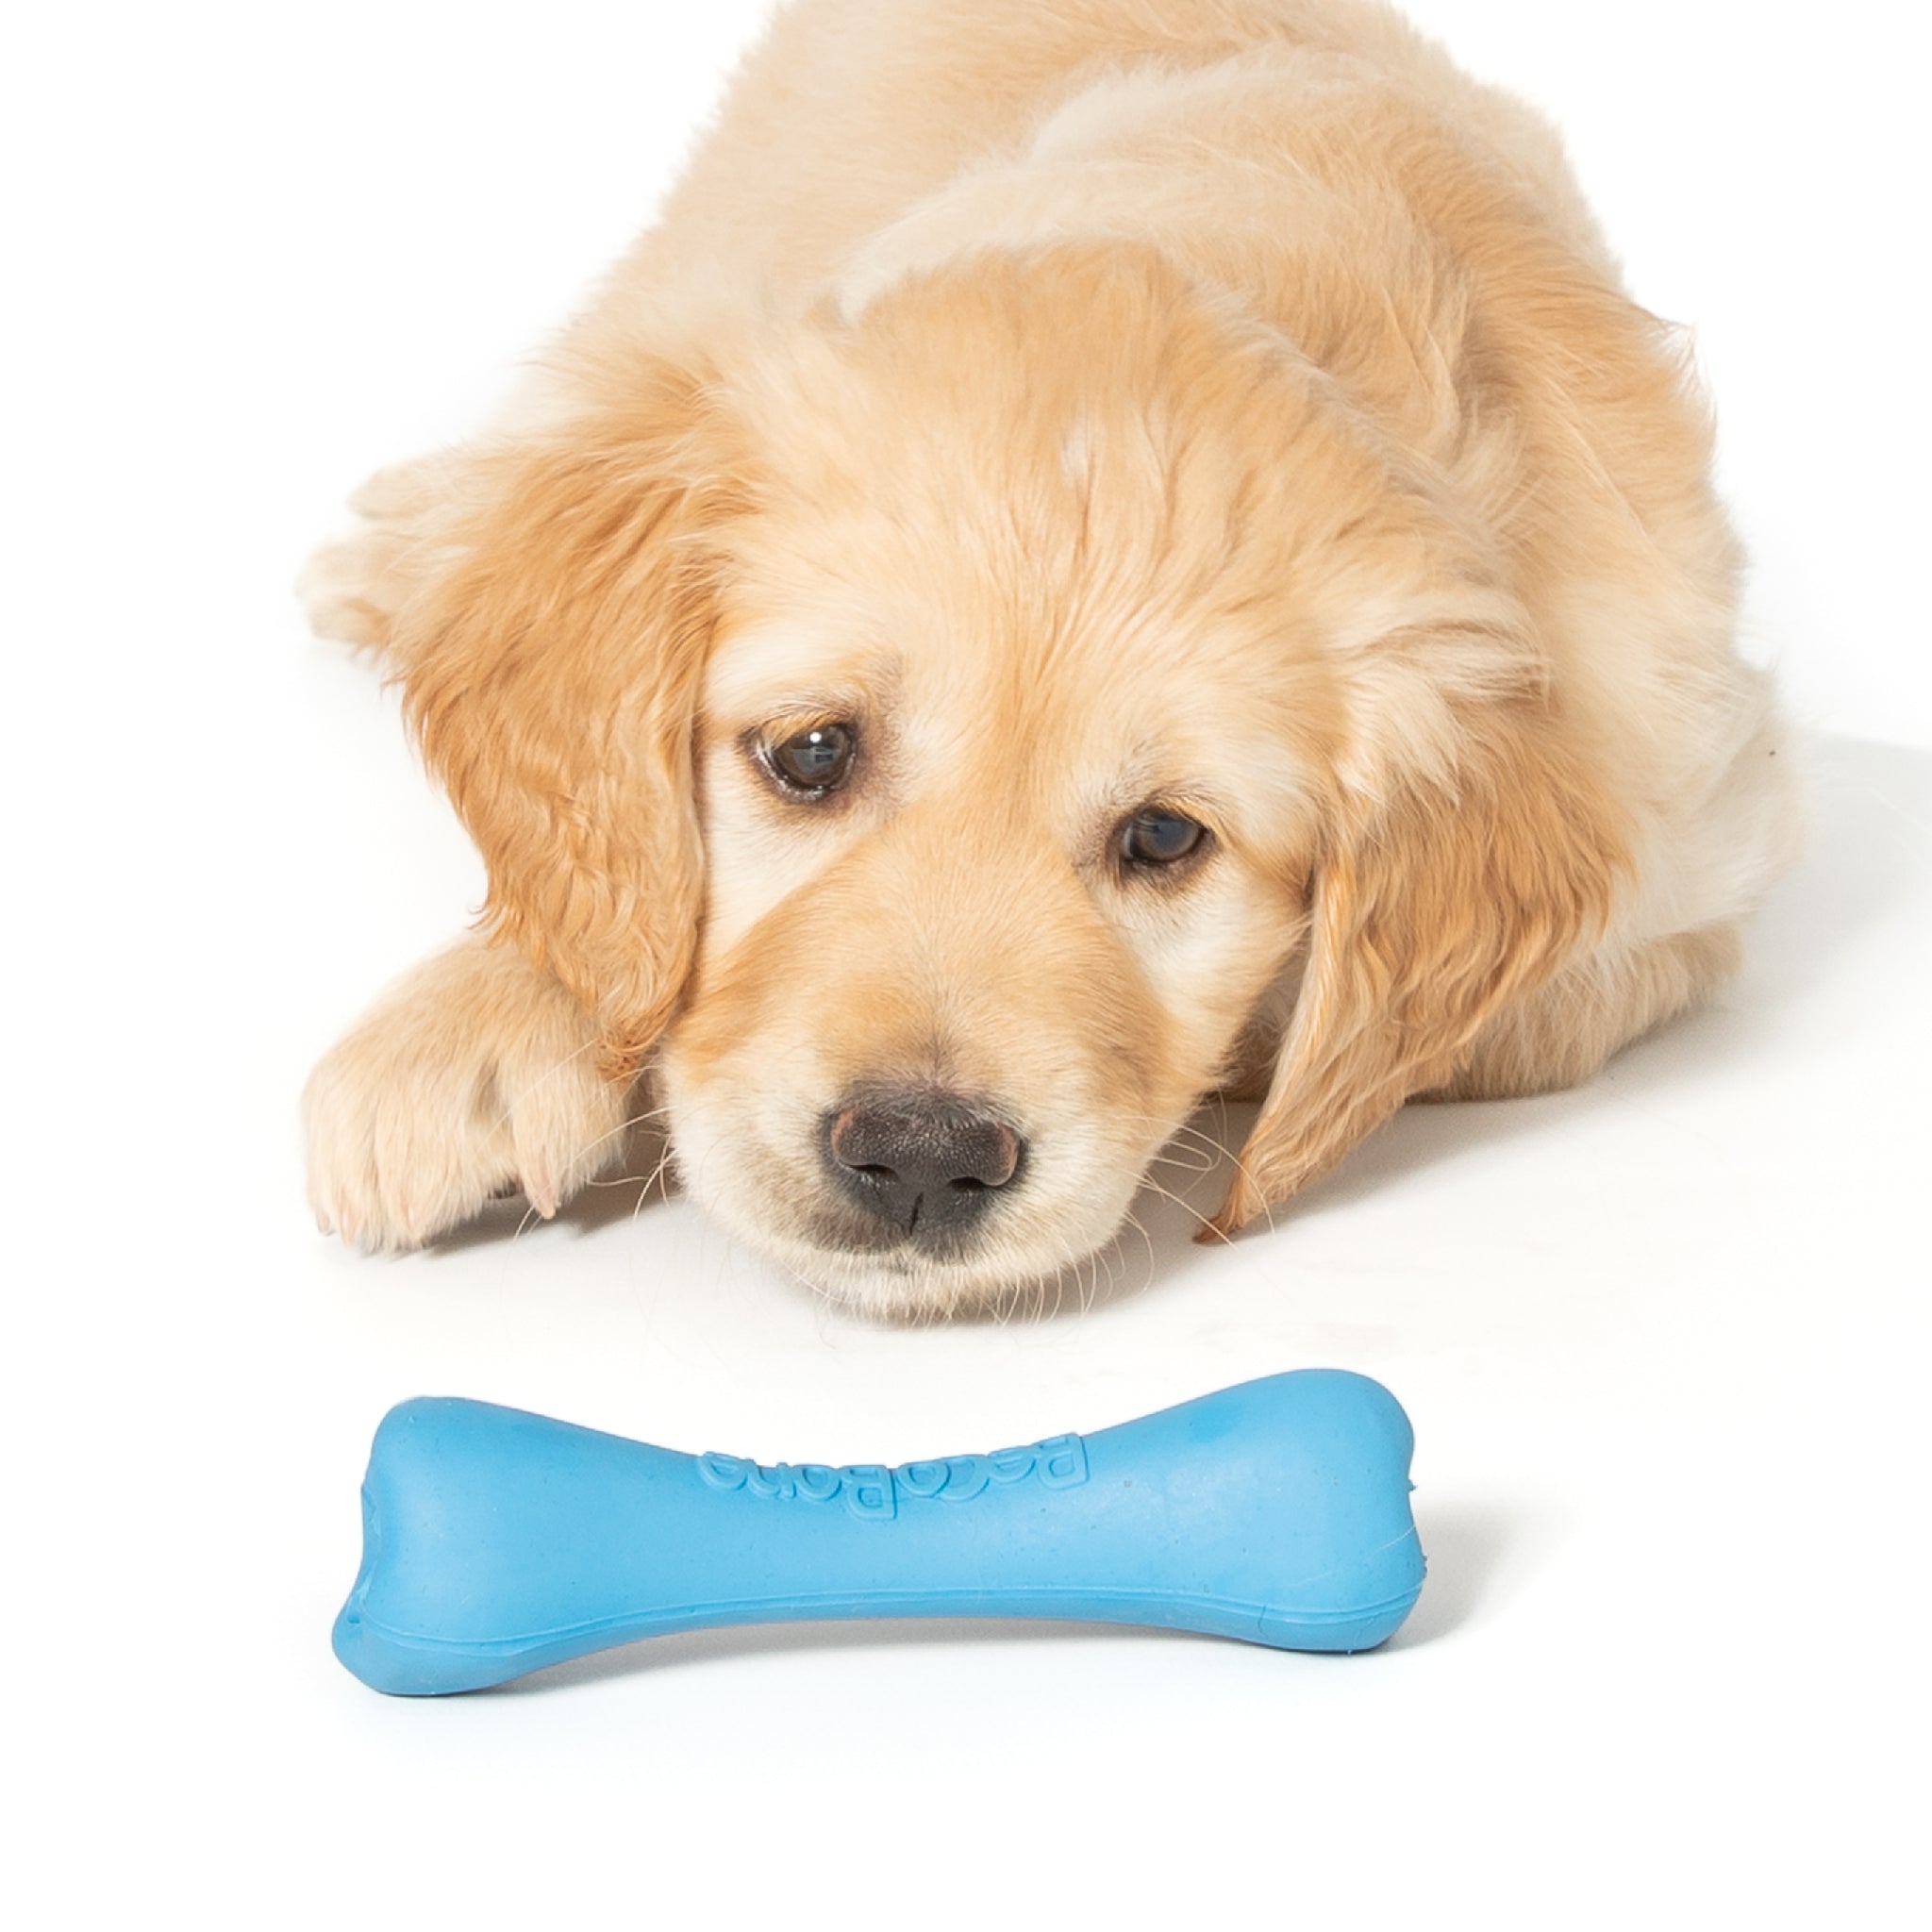 An image of a puppy curiously looking at the Blue Beco Rubber Bone.